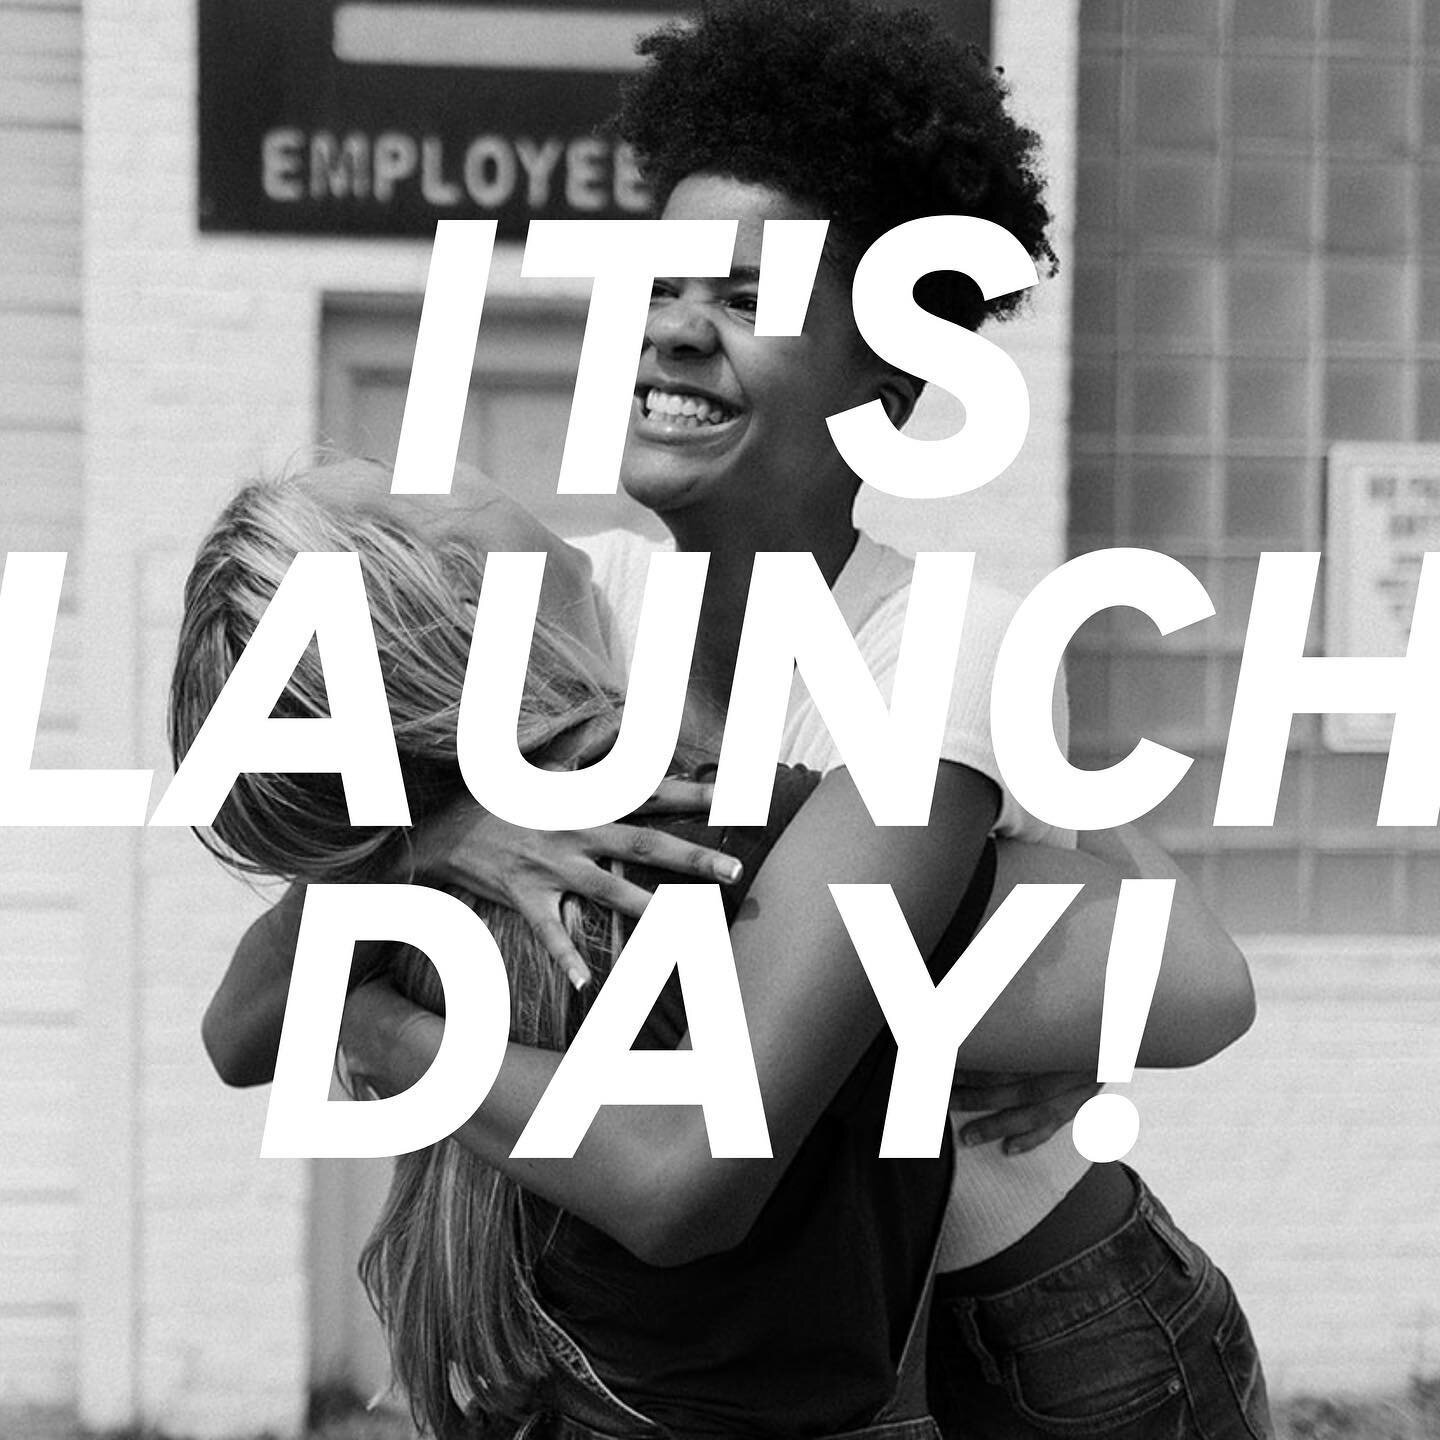 IT&rsquo;S LAUNCH DAY 🚀

Bloom&rsquo;s Virtual Launch Party will be held via Instagram Live TONIGHT at 6:00 PM!

Tonight&rsquo;s launch party will also double as a birthday celebration for Victoria, who inspired the creation of Bloom Mental Health. 